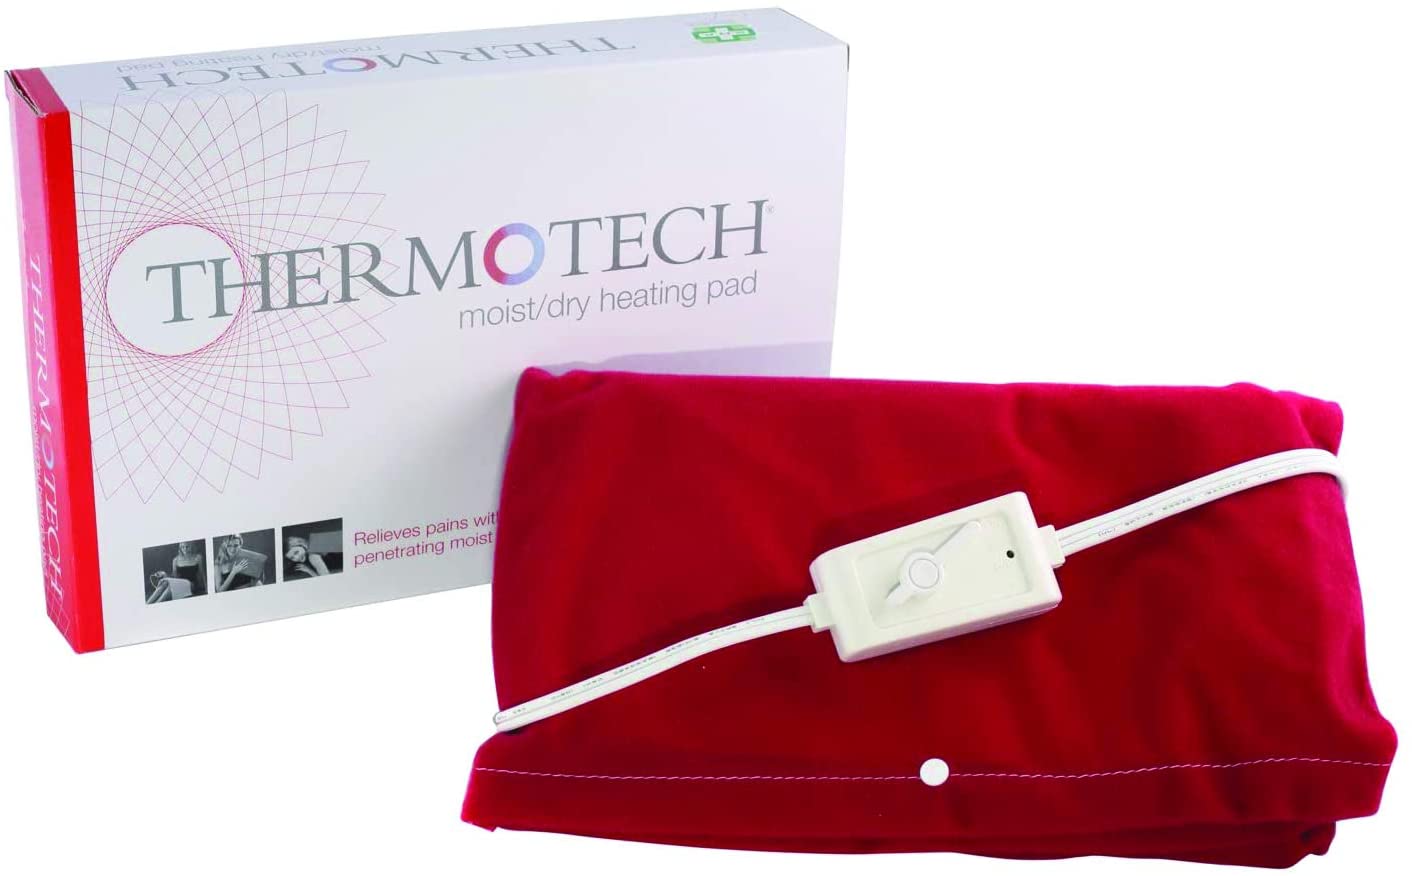 Electric Heating Pad for Back Pain and Cramps by Thermotech - 24" x 12"